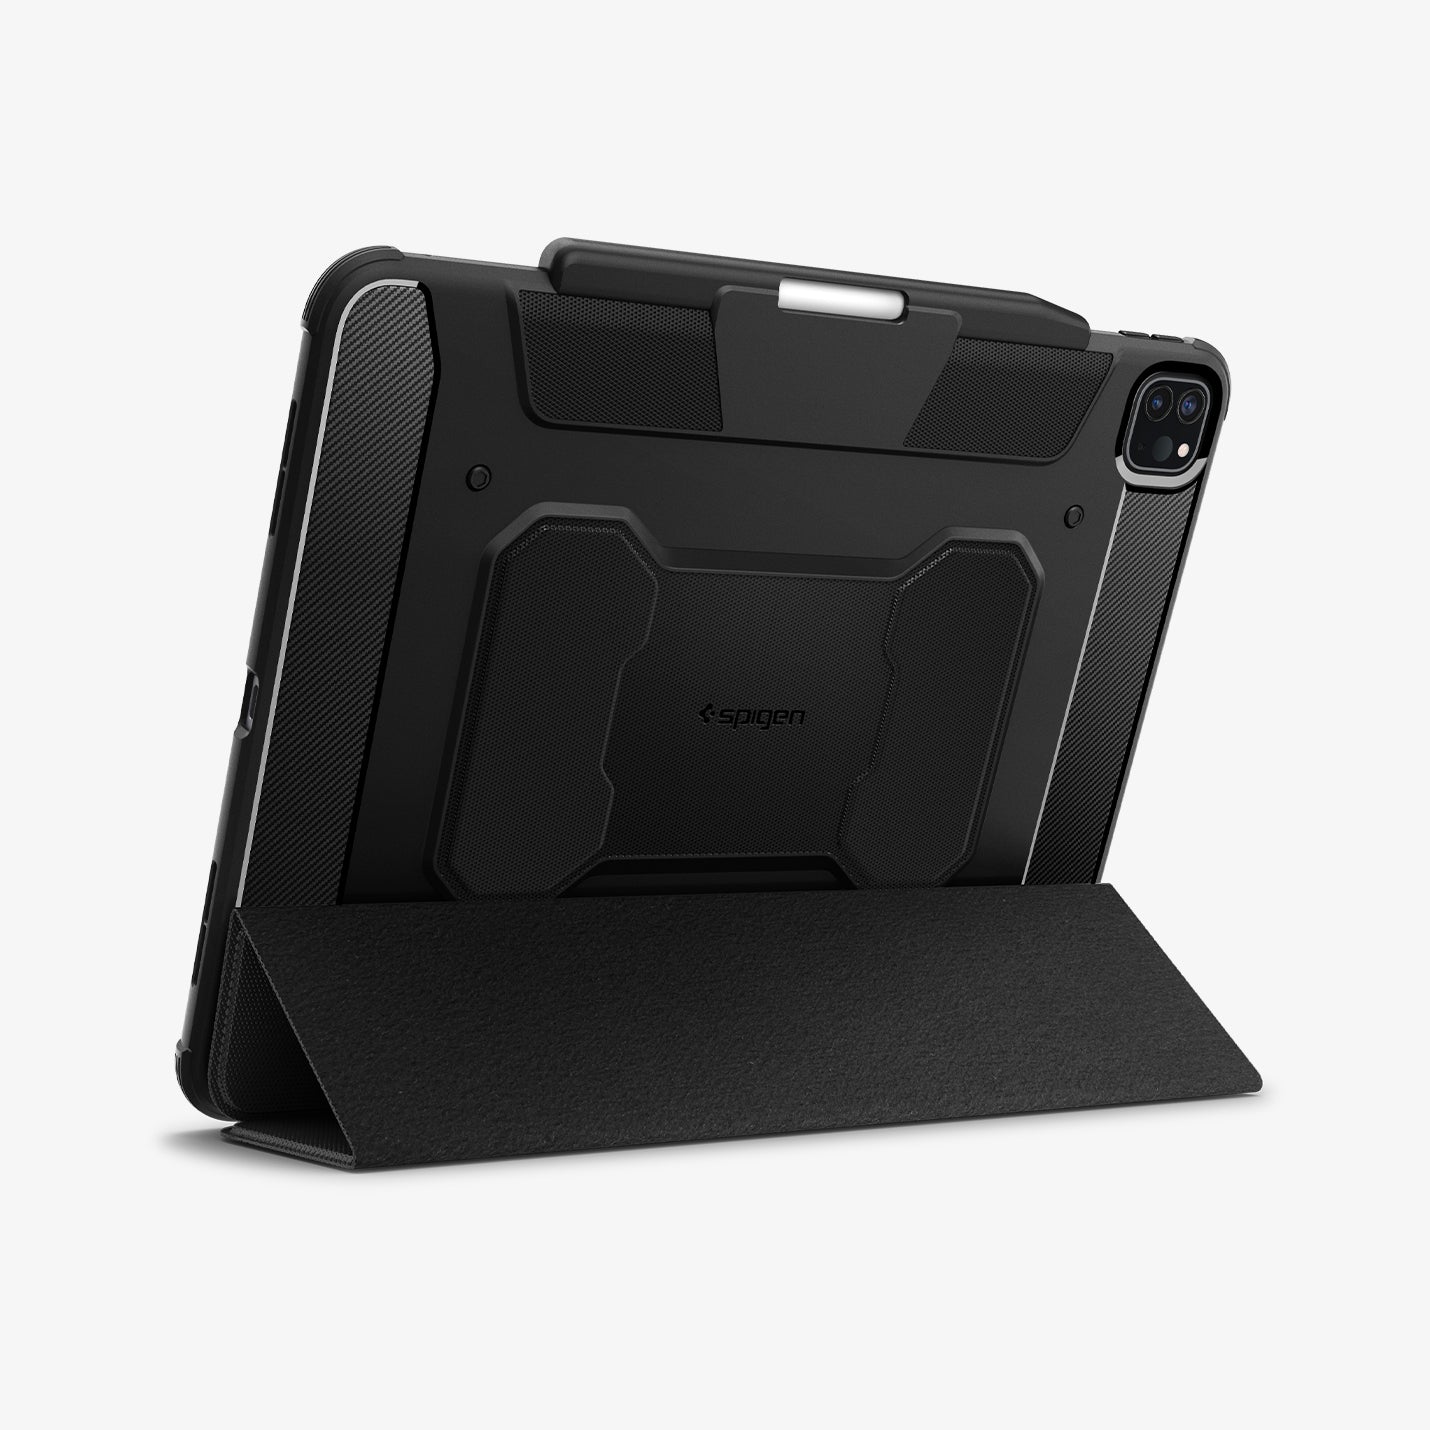 ACS07007 - iPad Pro 12.9-inch Case Rugged Armor Pro in Black showing the back, partial bottom with folded cover converted into kickstand with s-pen attached